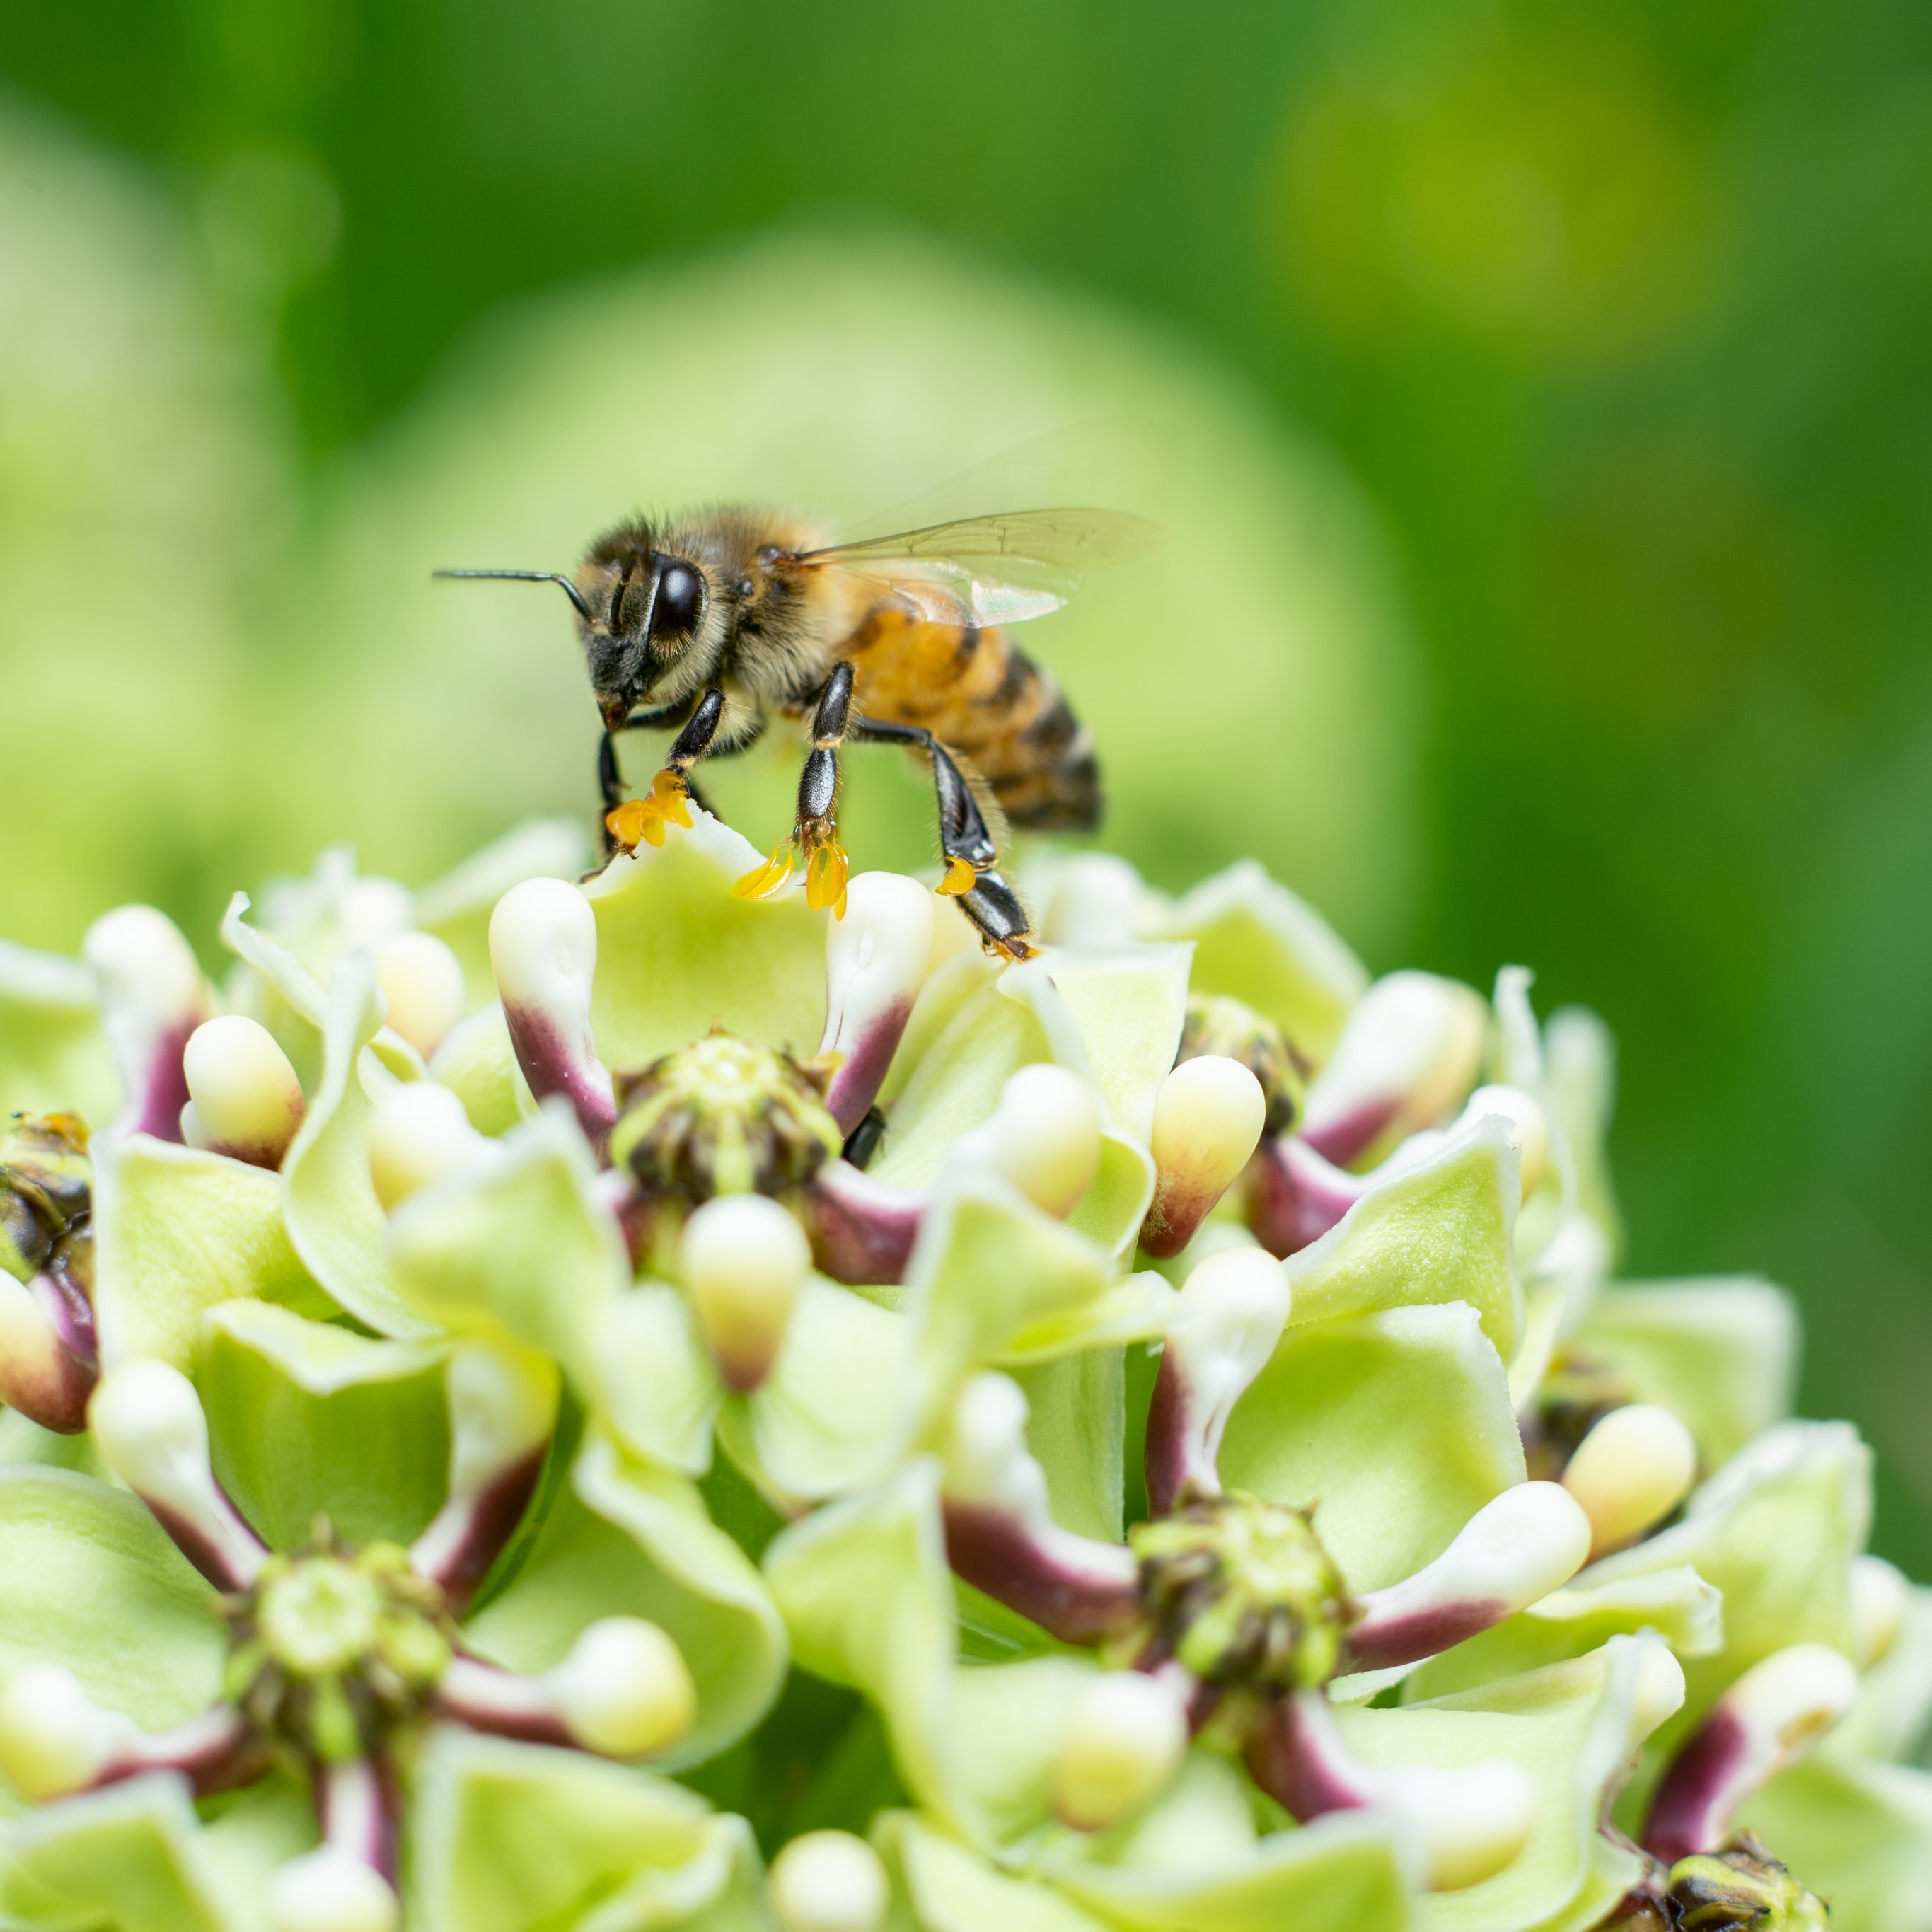 Bee on Flower Photo by Luis Rodriguez on Unsplash